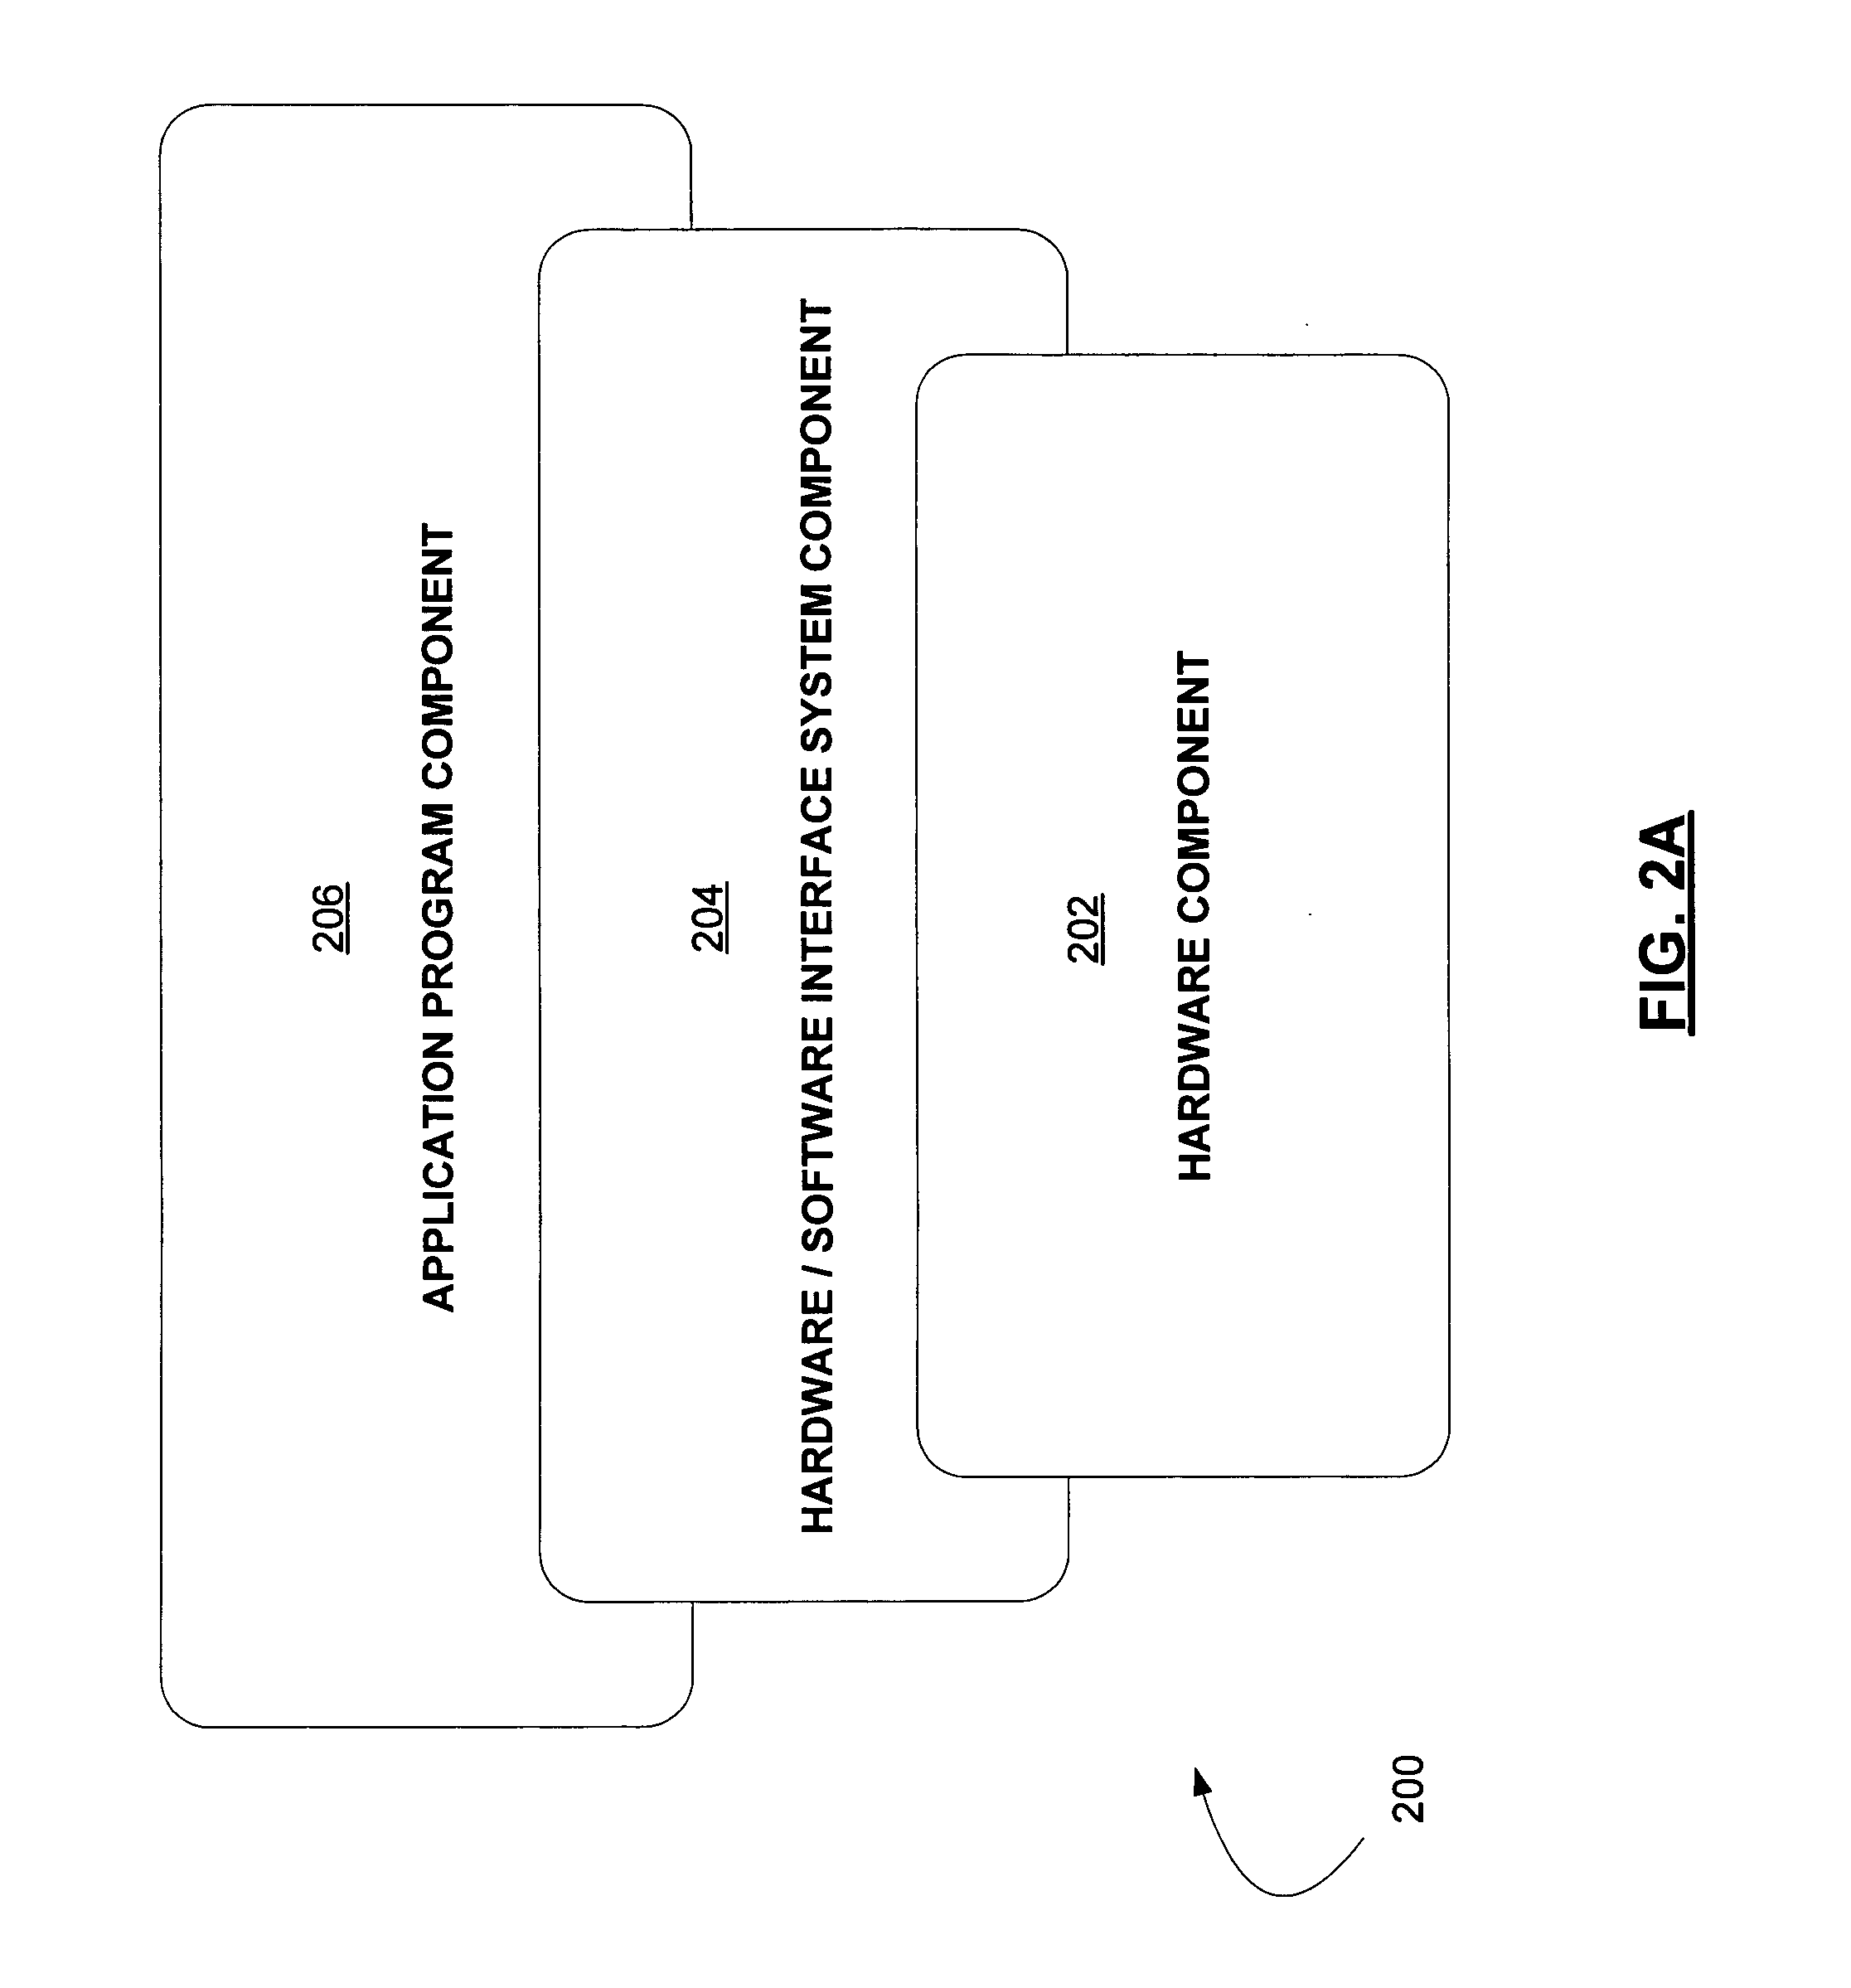 System and method for storing and presenting images and related items to a user